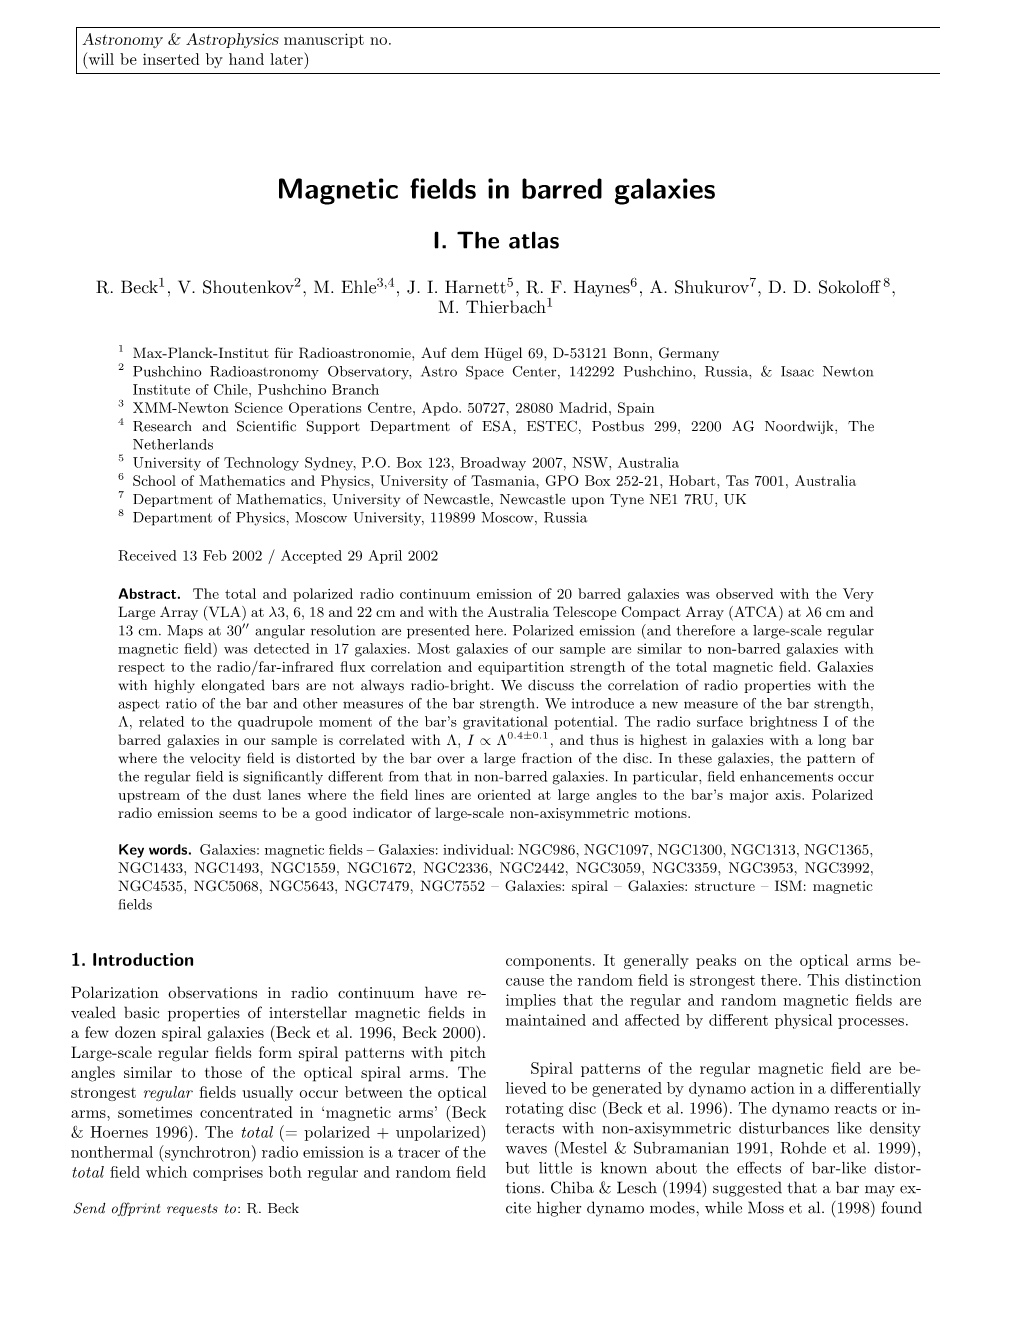 Magnetic Fields in Barred Galaxies. I. the Atlas